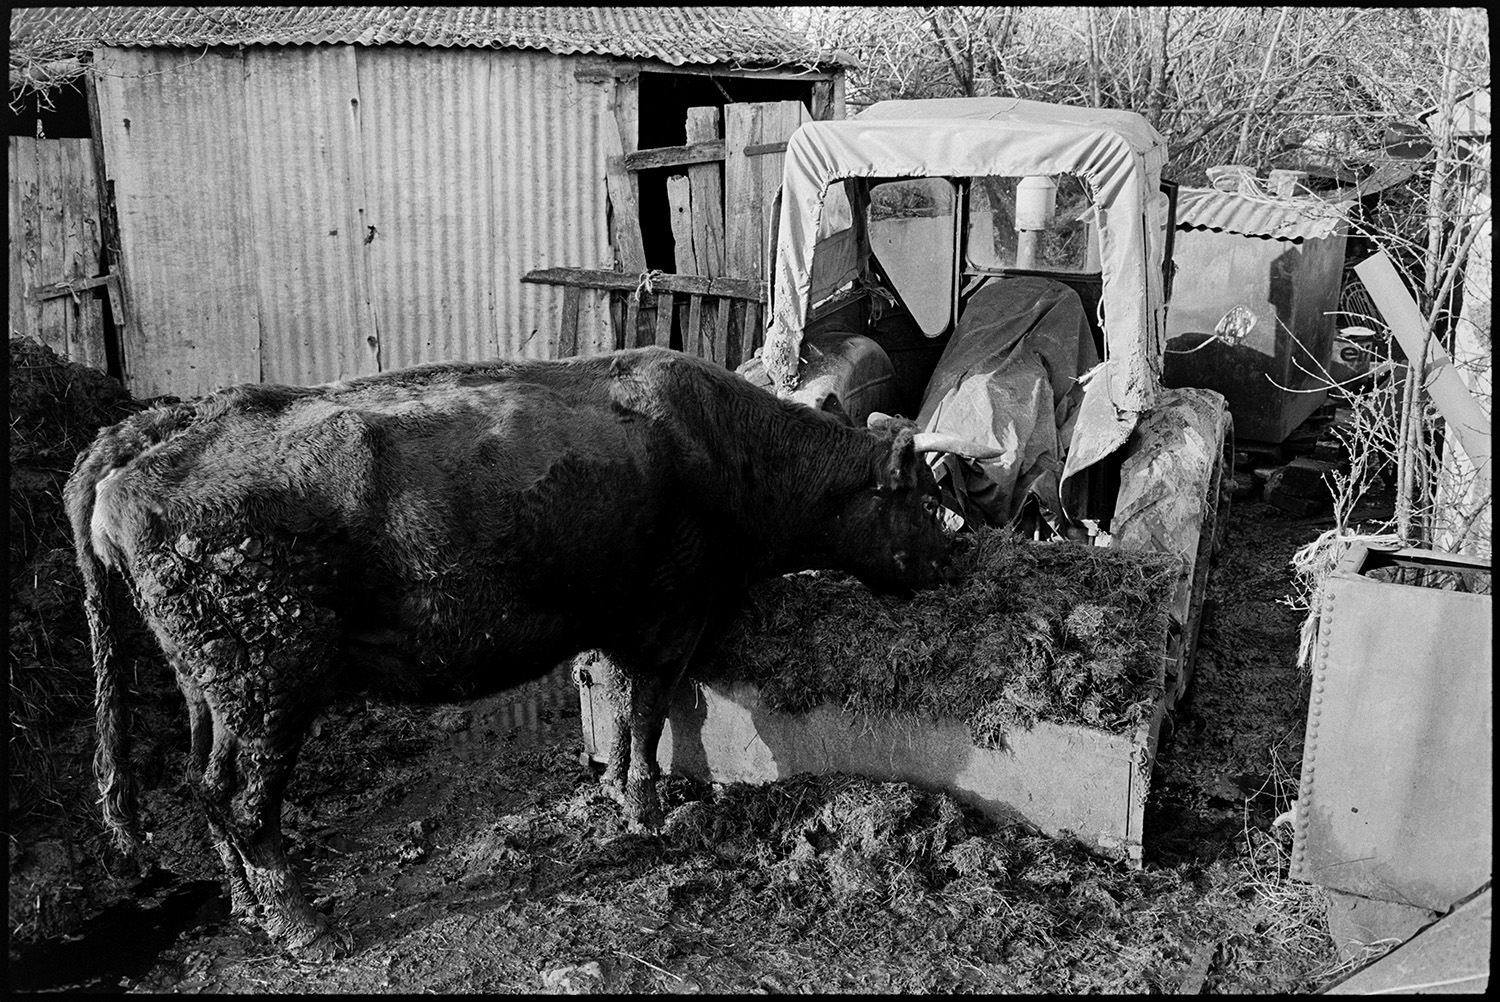 Muddy farmyard with tractor and link box, cow and collapsing old barns, tights on washing line.
[Cow feeding out of a link box attached to tractor, in a muddy farmyard at Cuppers Piece, Beaford. A corrugated iron barn with wooden doors is visible in the background.]